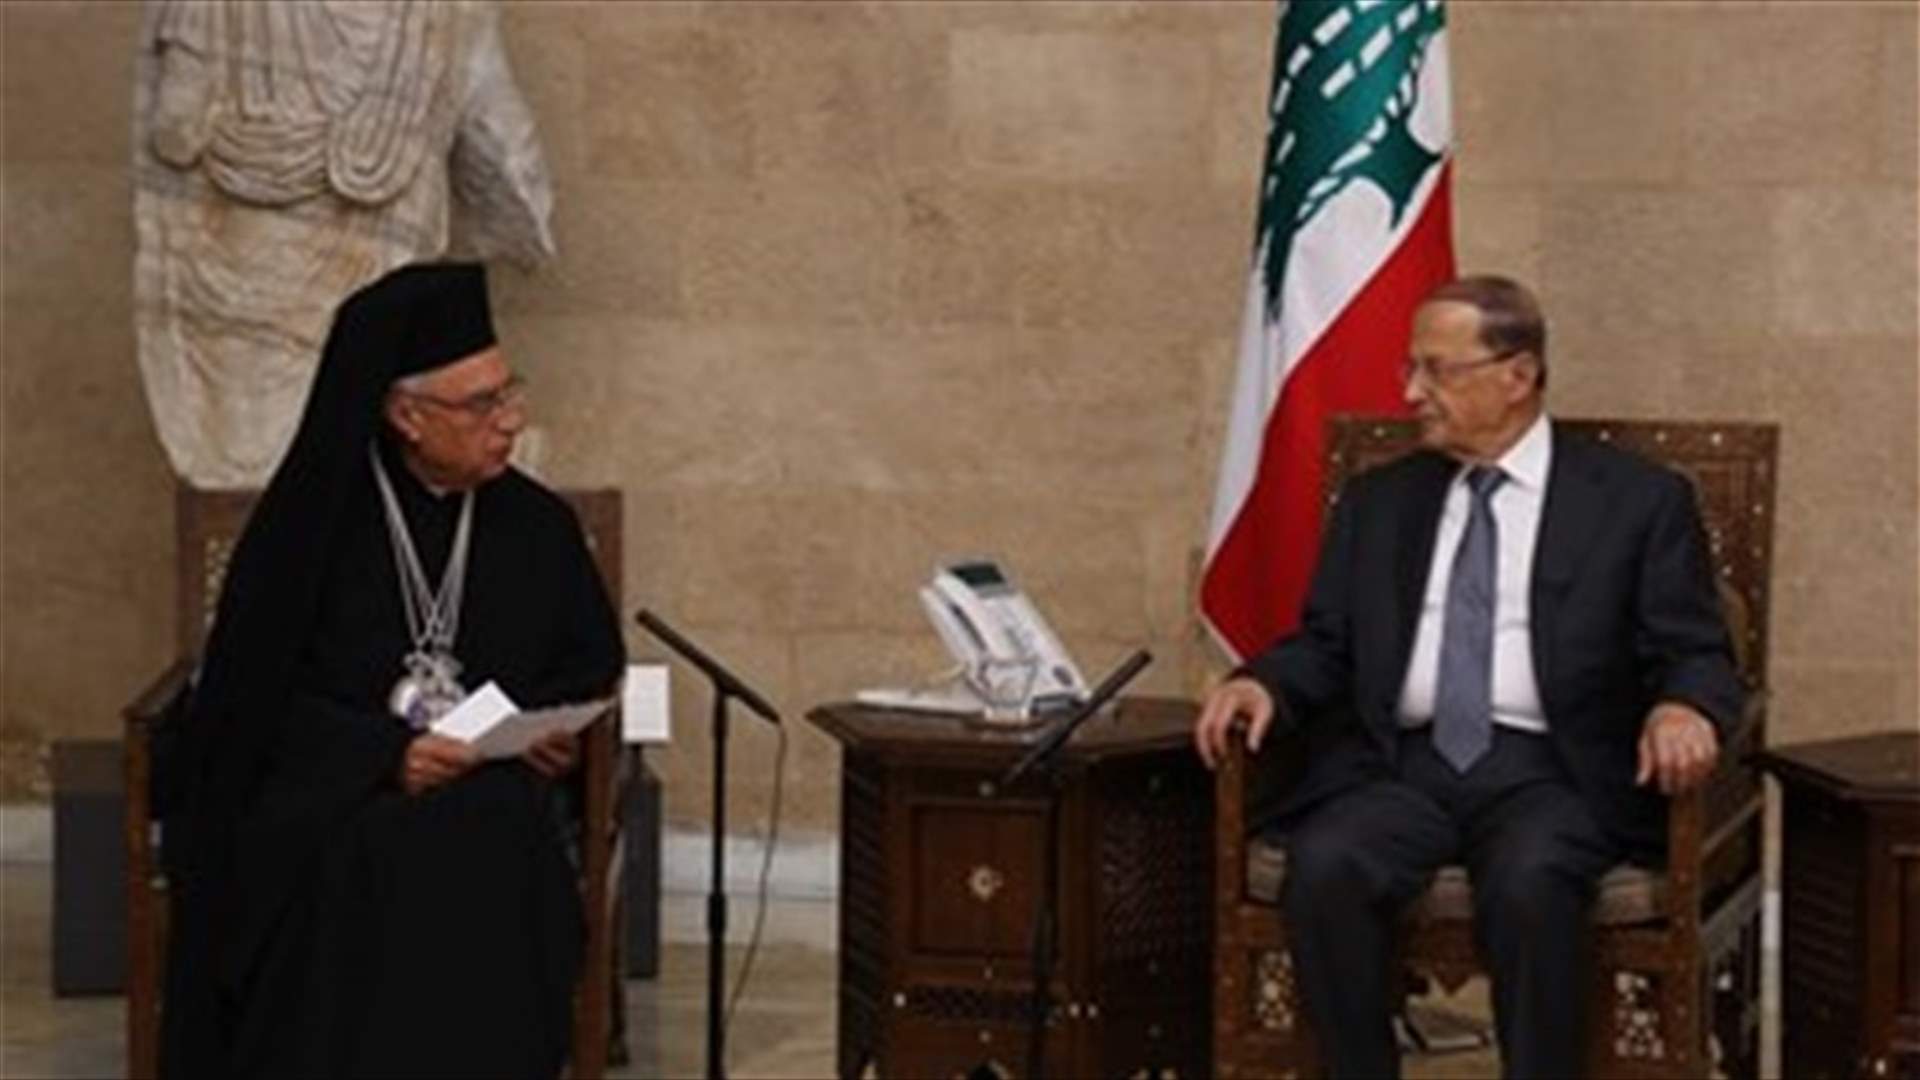 President Aoun calls for unity “to address challenges”